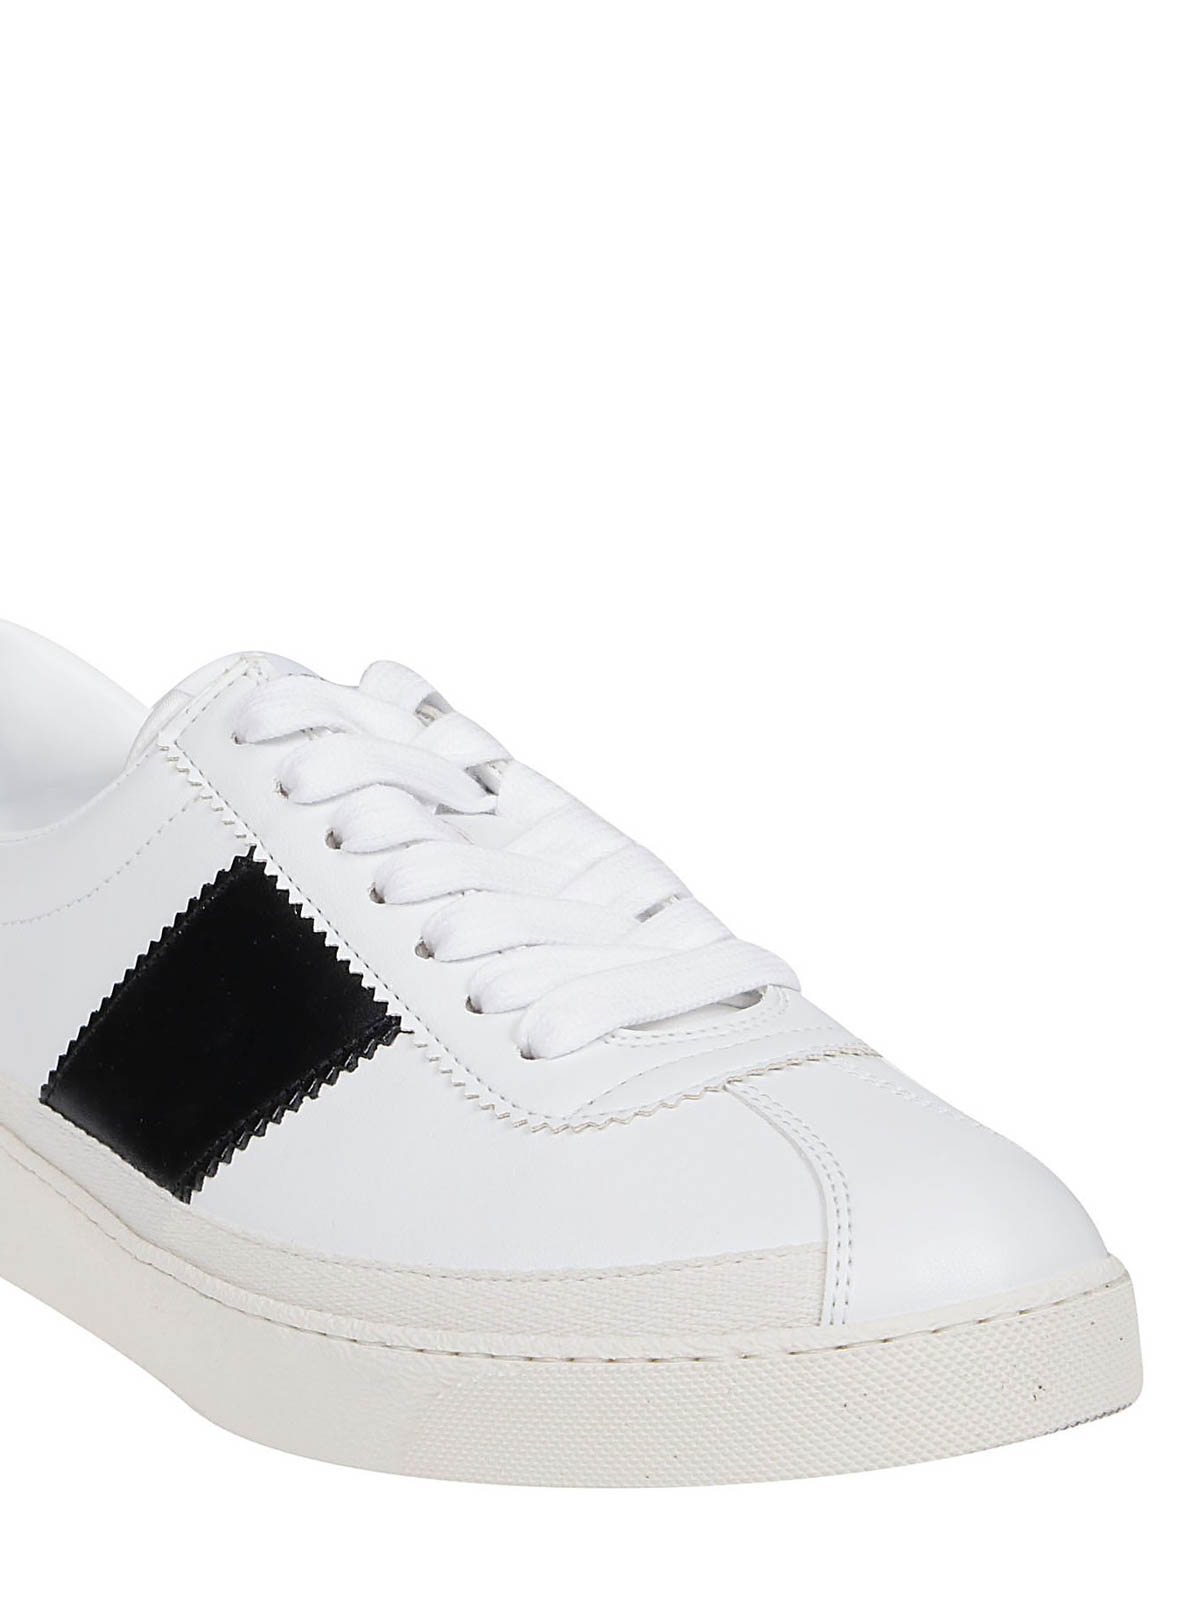 Trainers Tom Ford - Bannister sneakers - J1261TTAP001C1902 